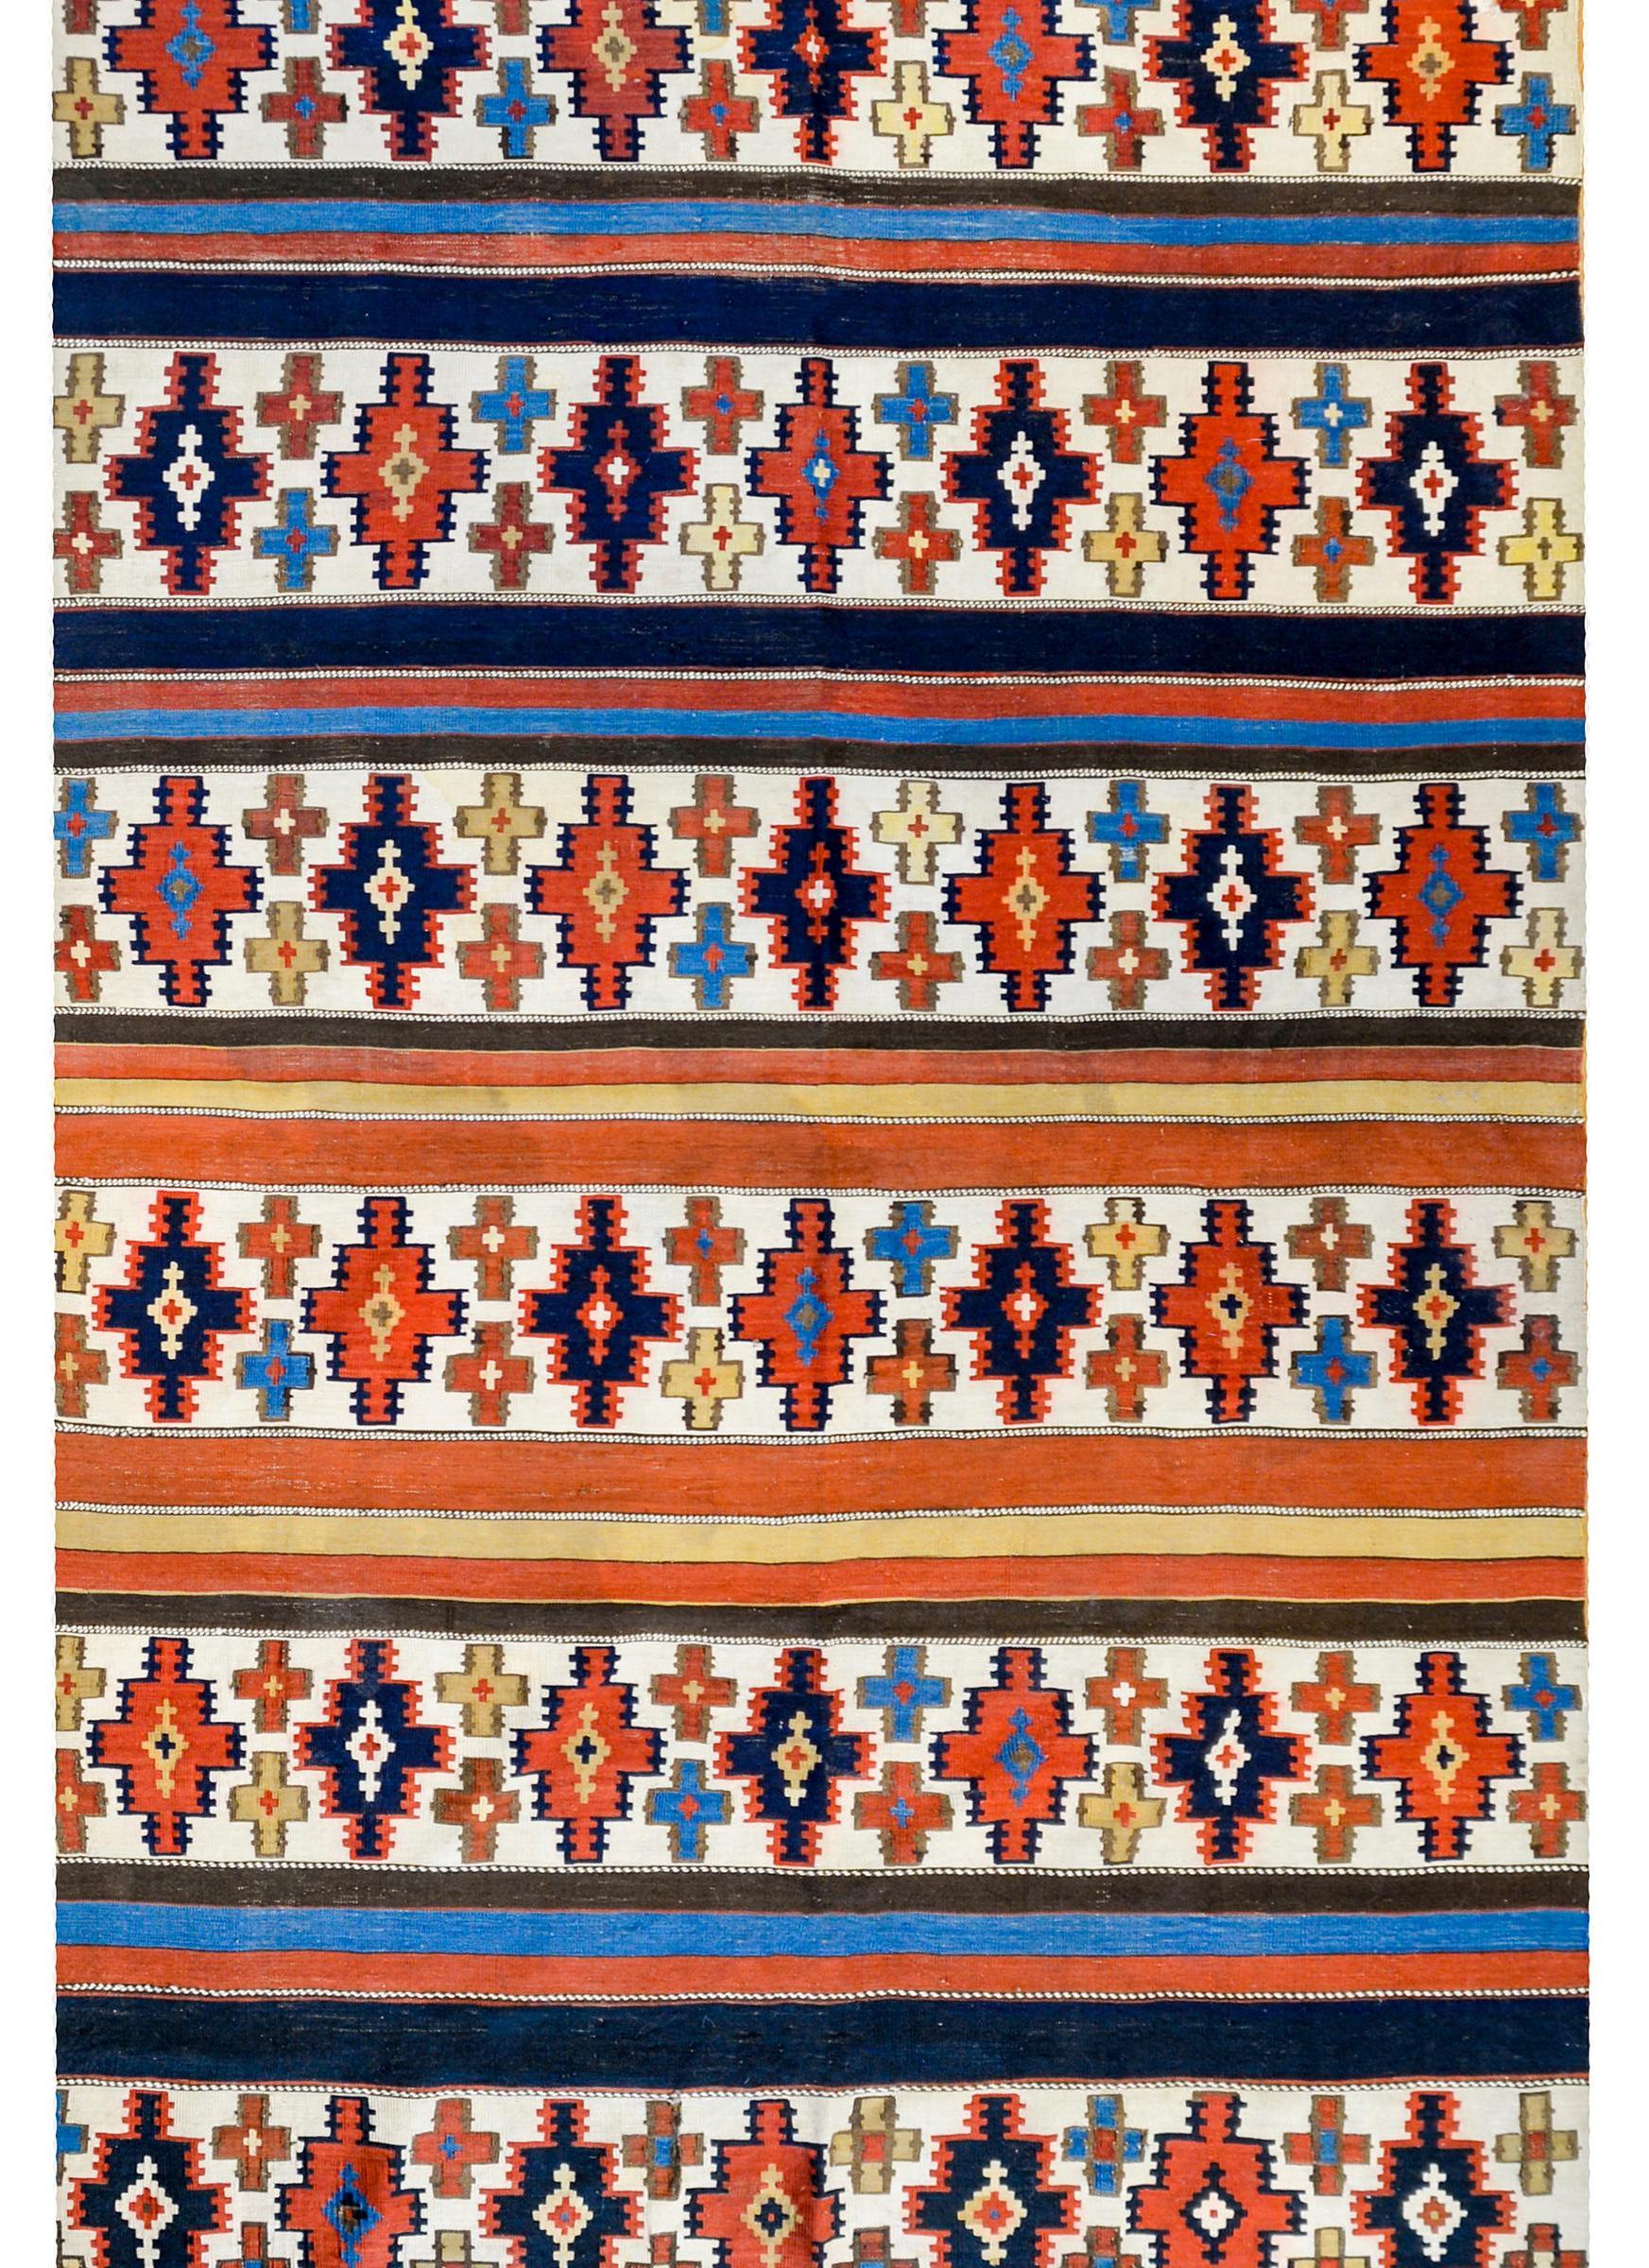 A gorgeous early 20th century Shahsevan Kilim runner with an all-over stepped diamond striped pattern woven in bold crimsons, indigos, gold’s, and browns, with alternating solid colored stripes in between.